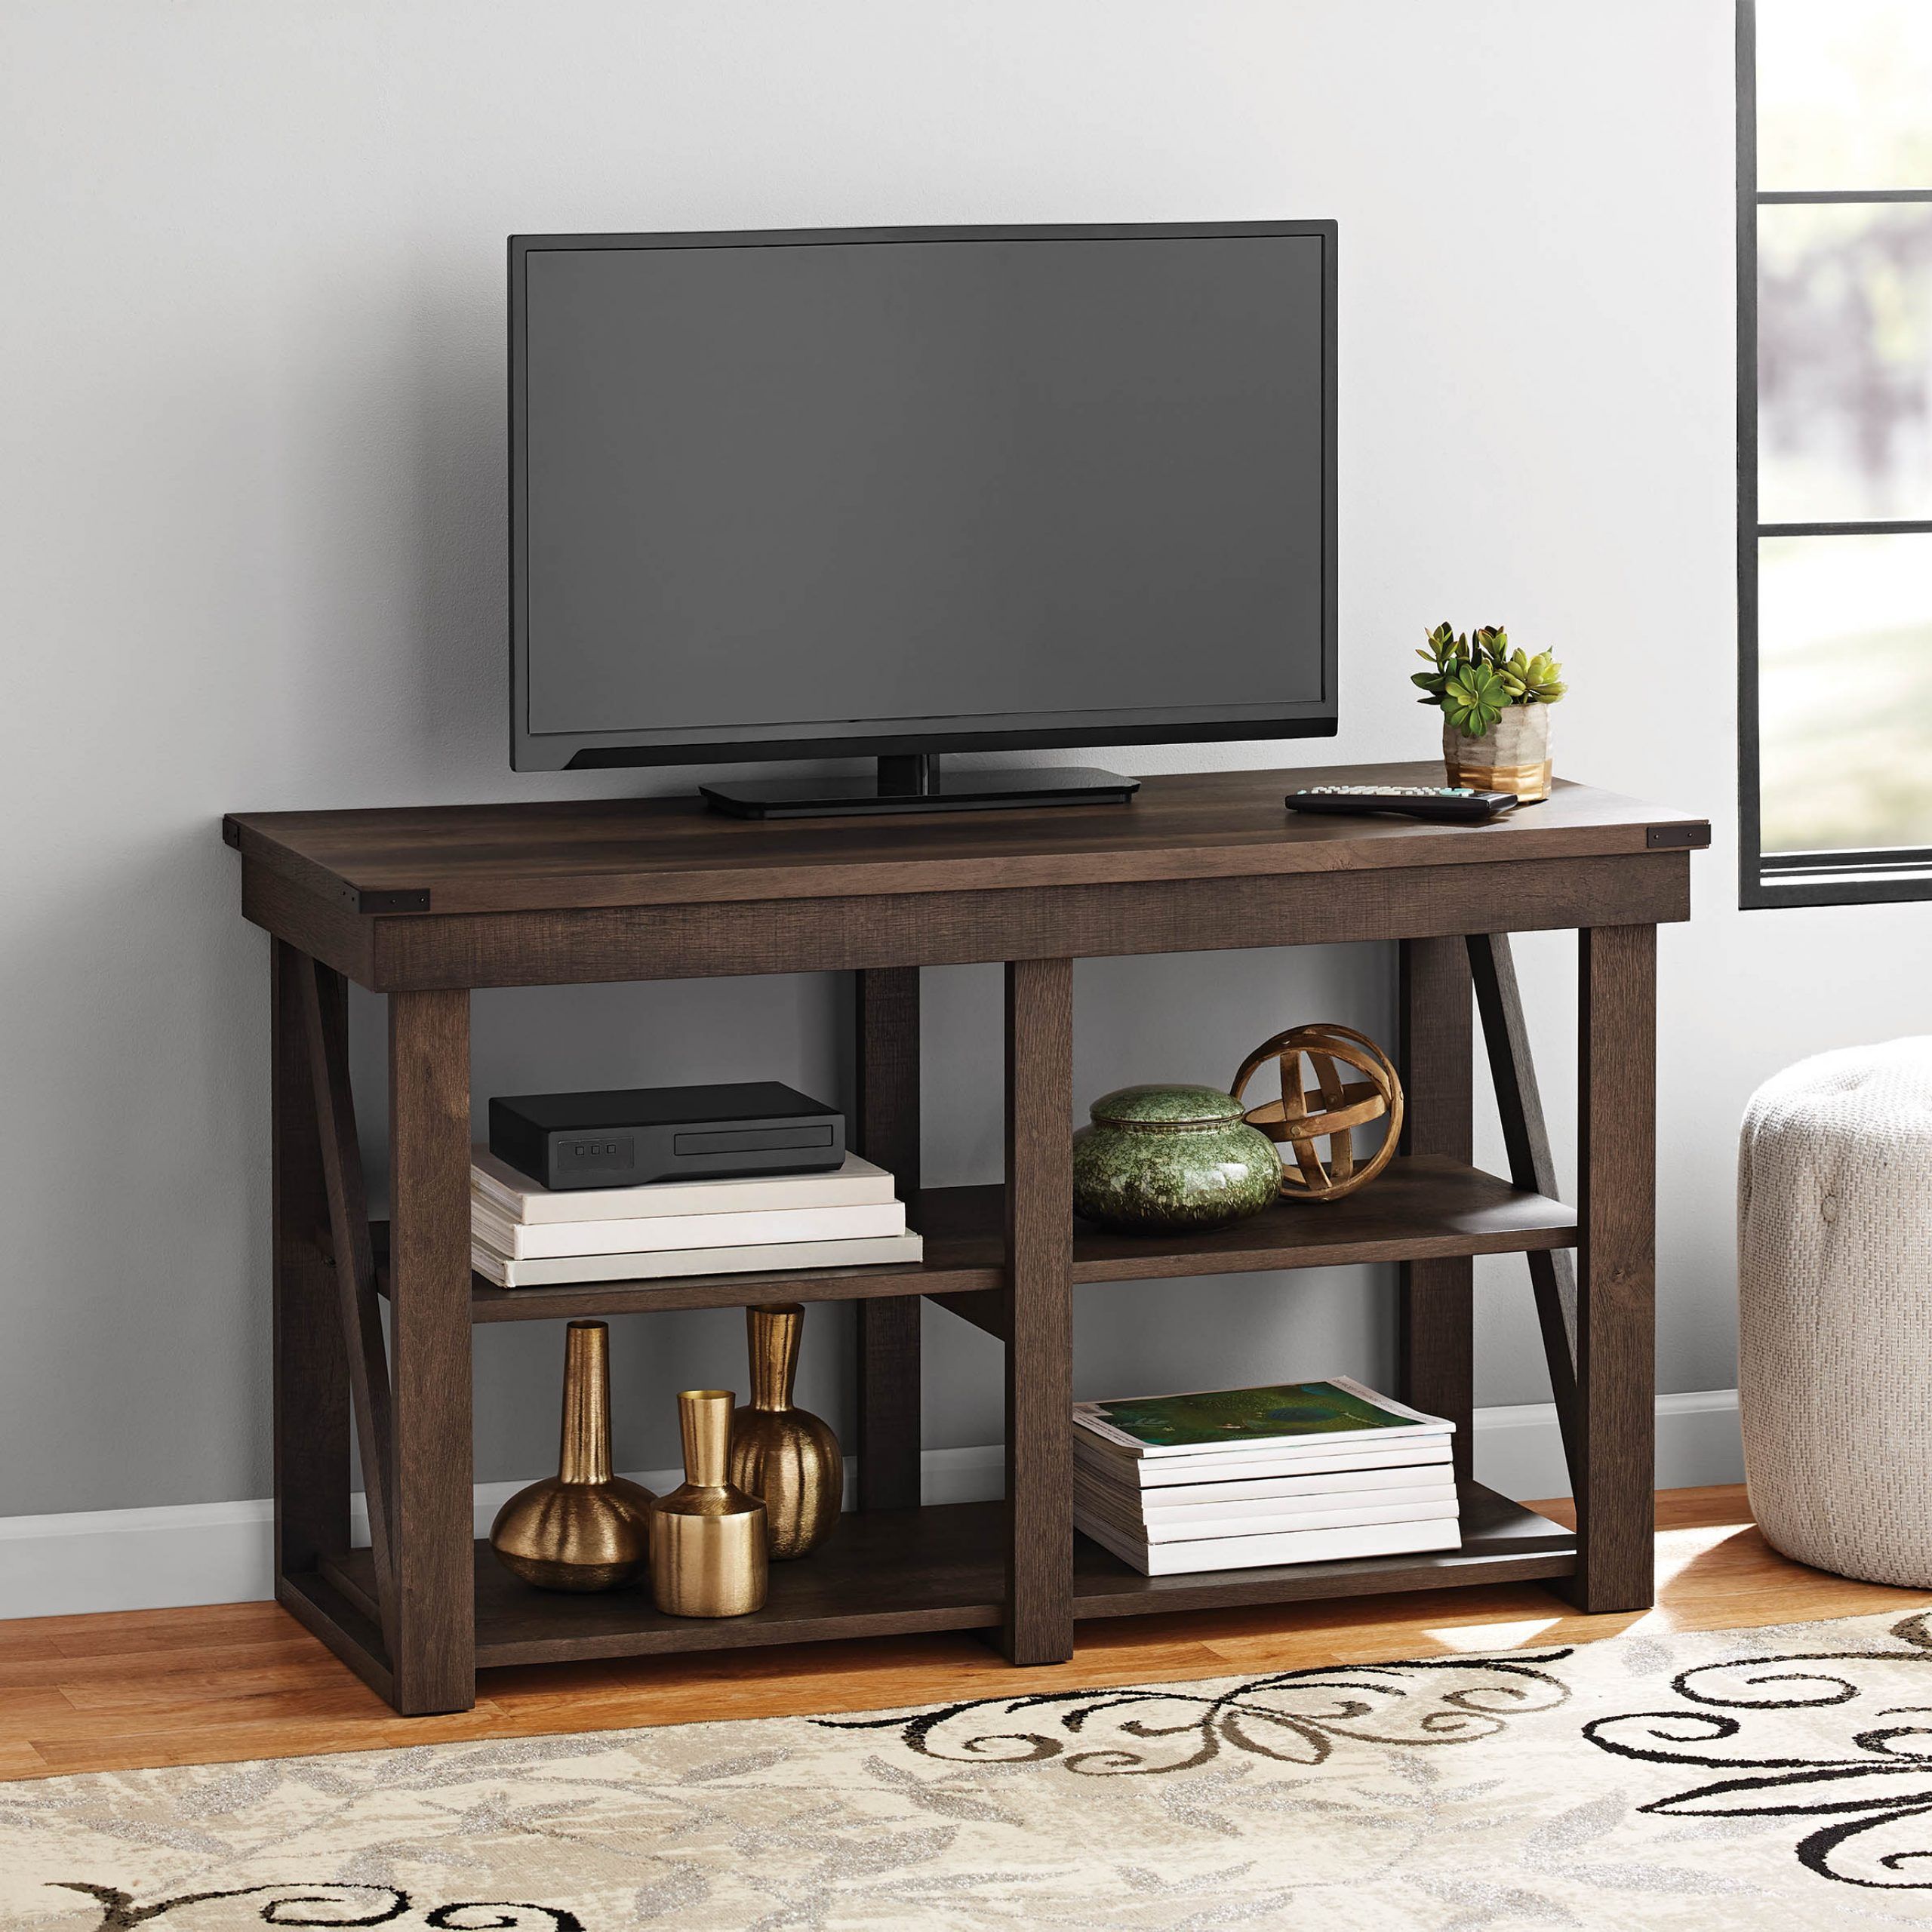 Flat Screen Tv Stand At Walmart — Shermanscreek With Most Popular Whalen Shelf Tv Stands With Floater Mount In Weathered Dark Pine Finish (View 3 of 10)